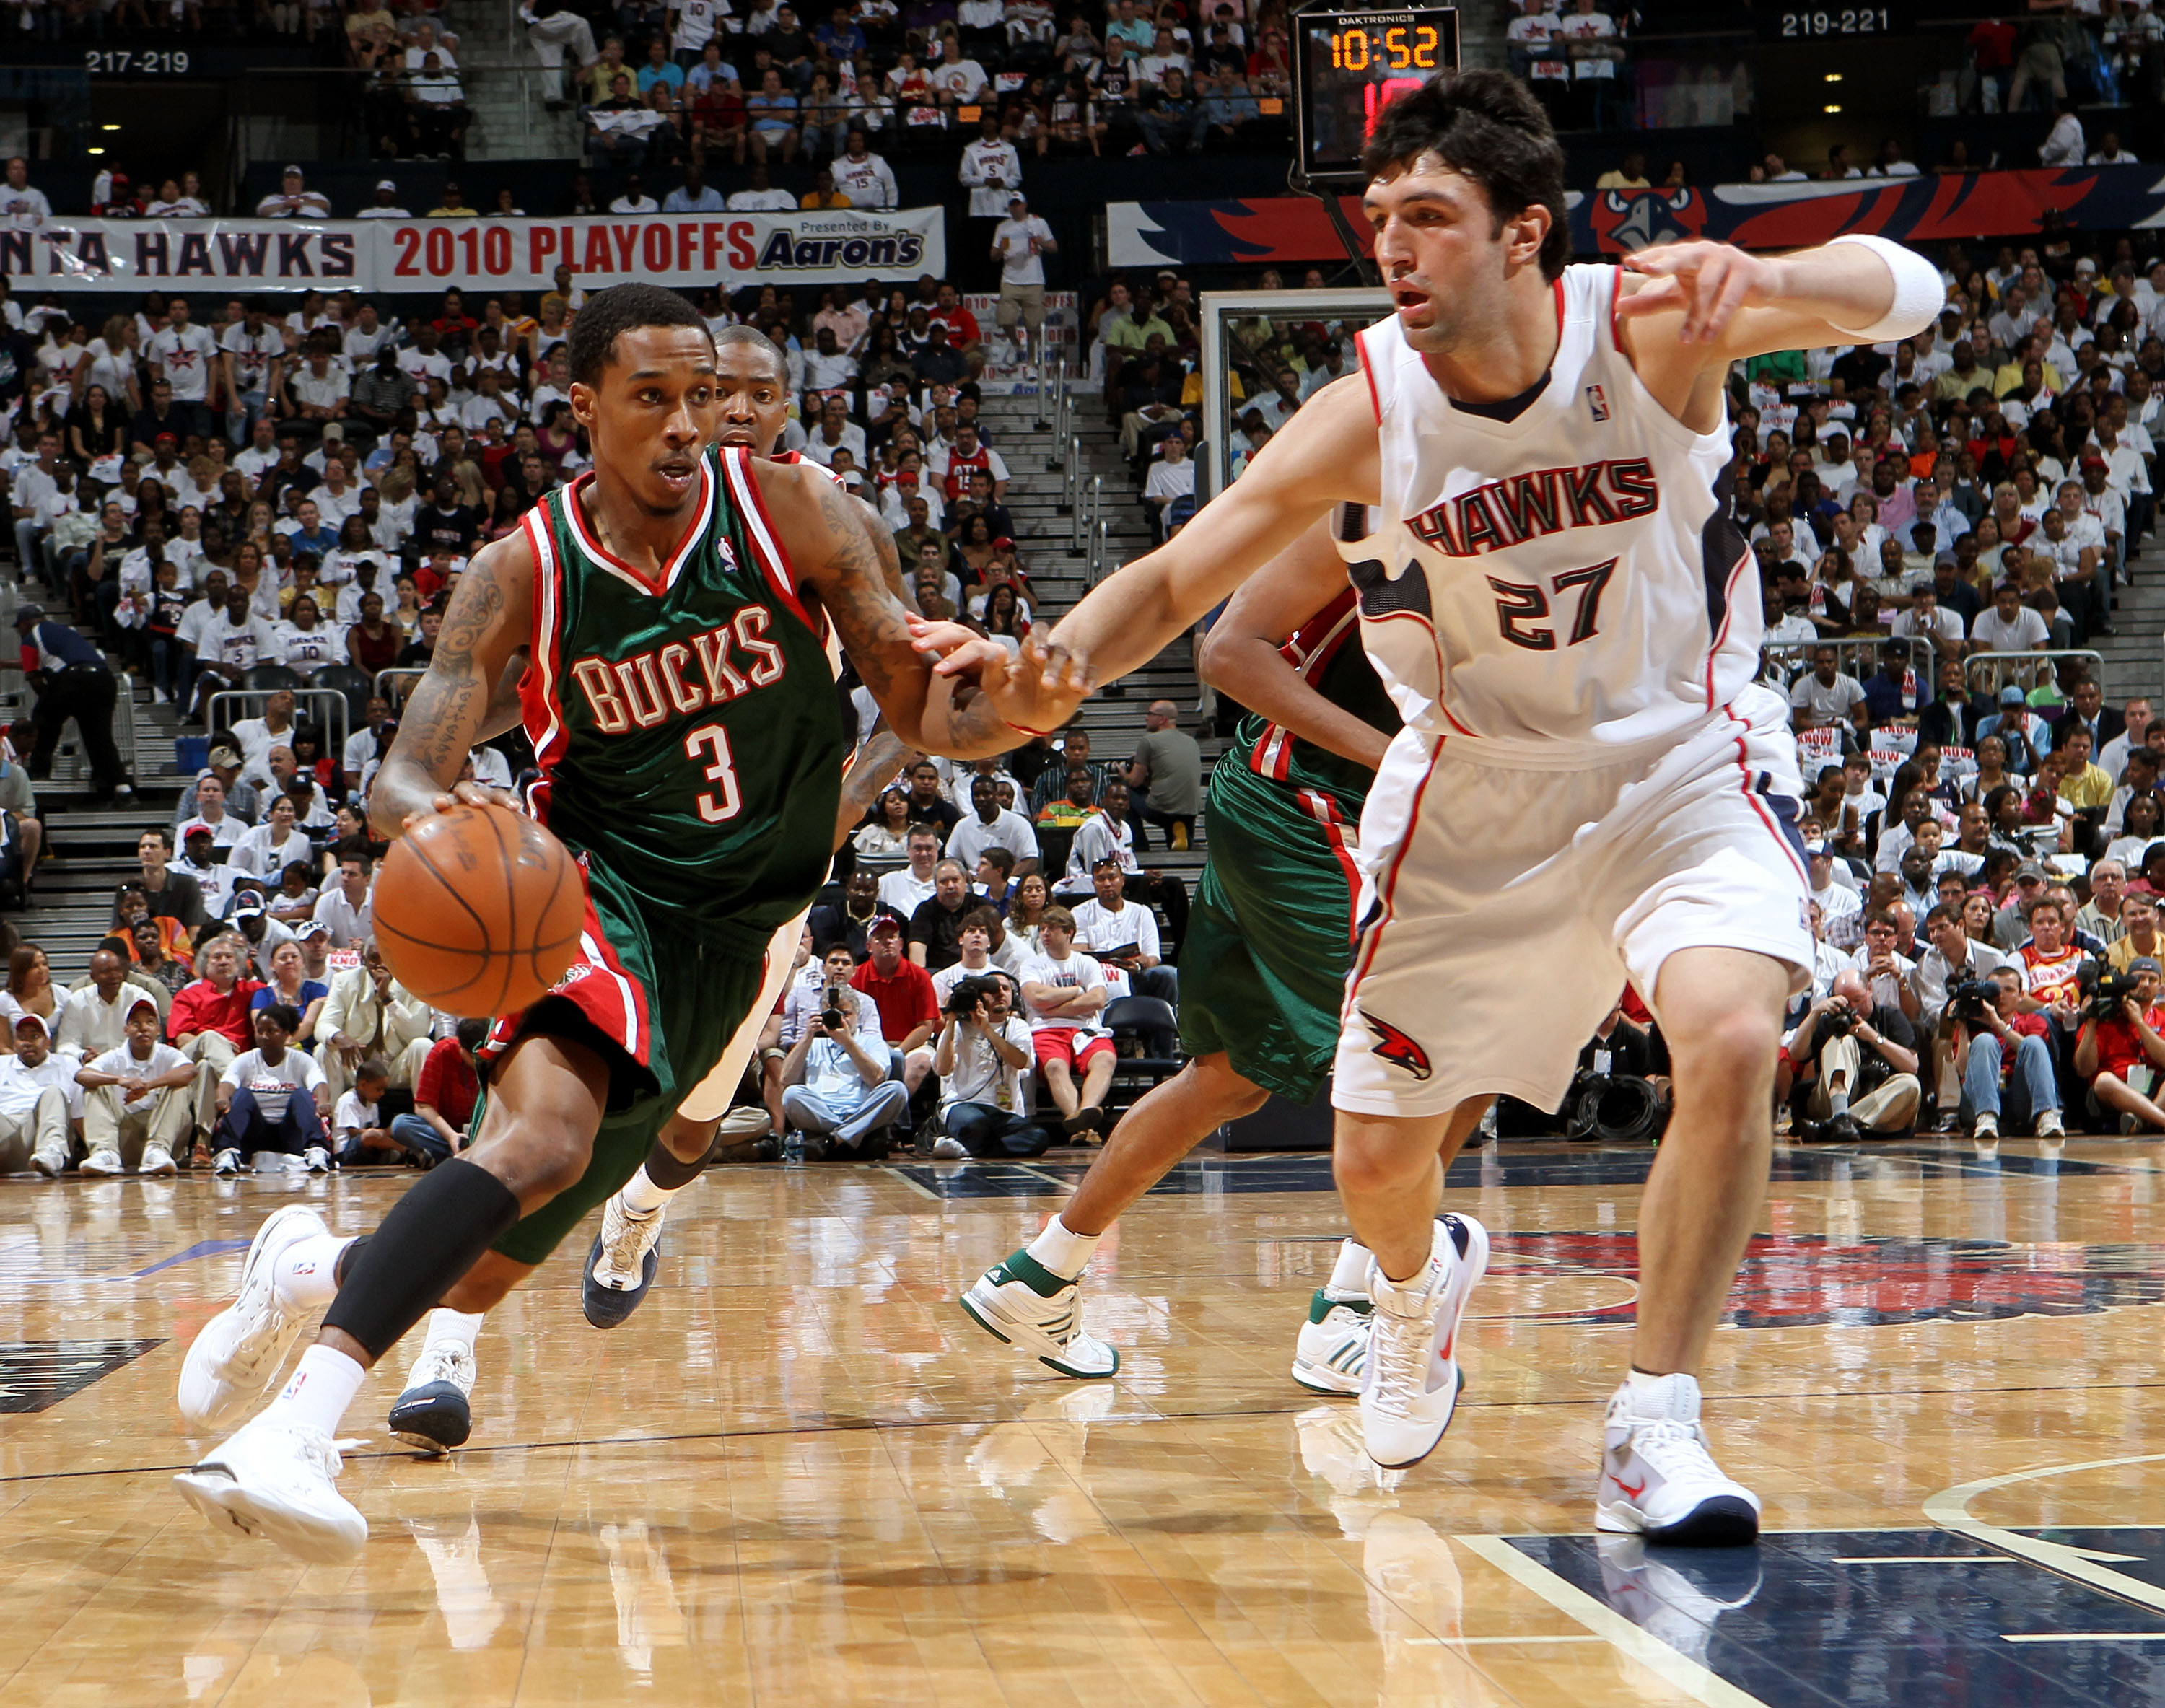 ATLANTA - MAY 2:  Guard Brandon Jennings #3 of the Milwaukee Bucks dribbles past center Zaza Pachulia #27 of the Atlanta Hawks during Game Seven of the Eastern Conference Quarterfinals between the Milwaukee Bucks and the Atlanta Hawks during the 2010 NBA